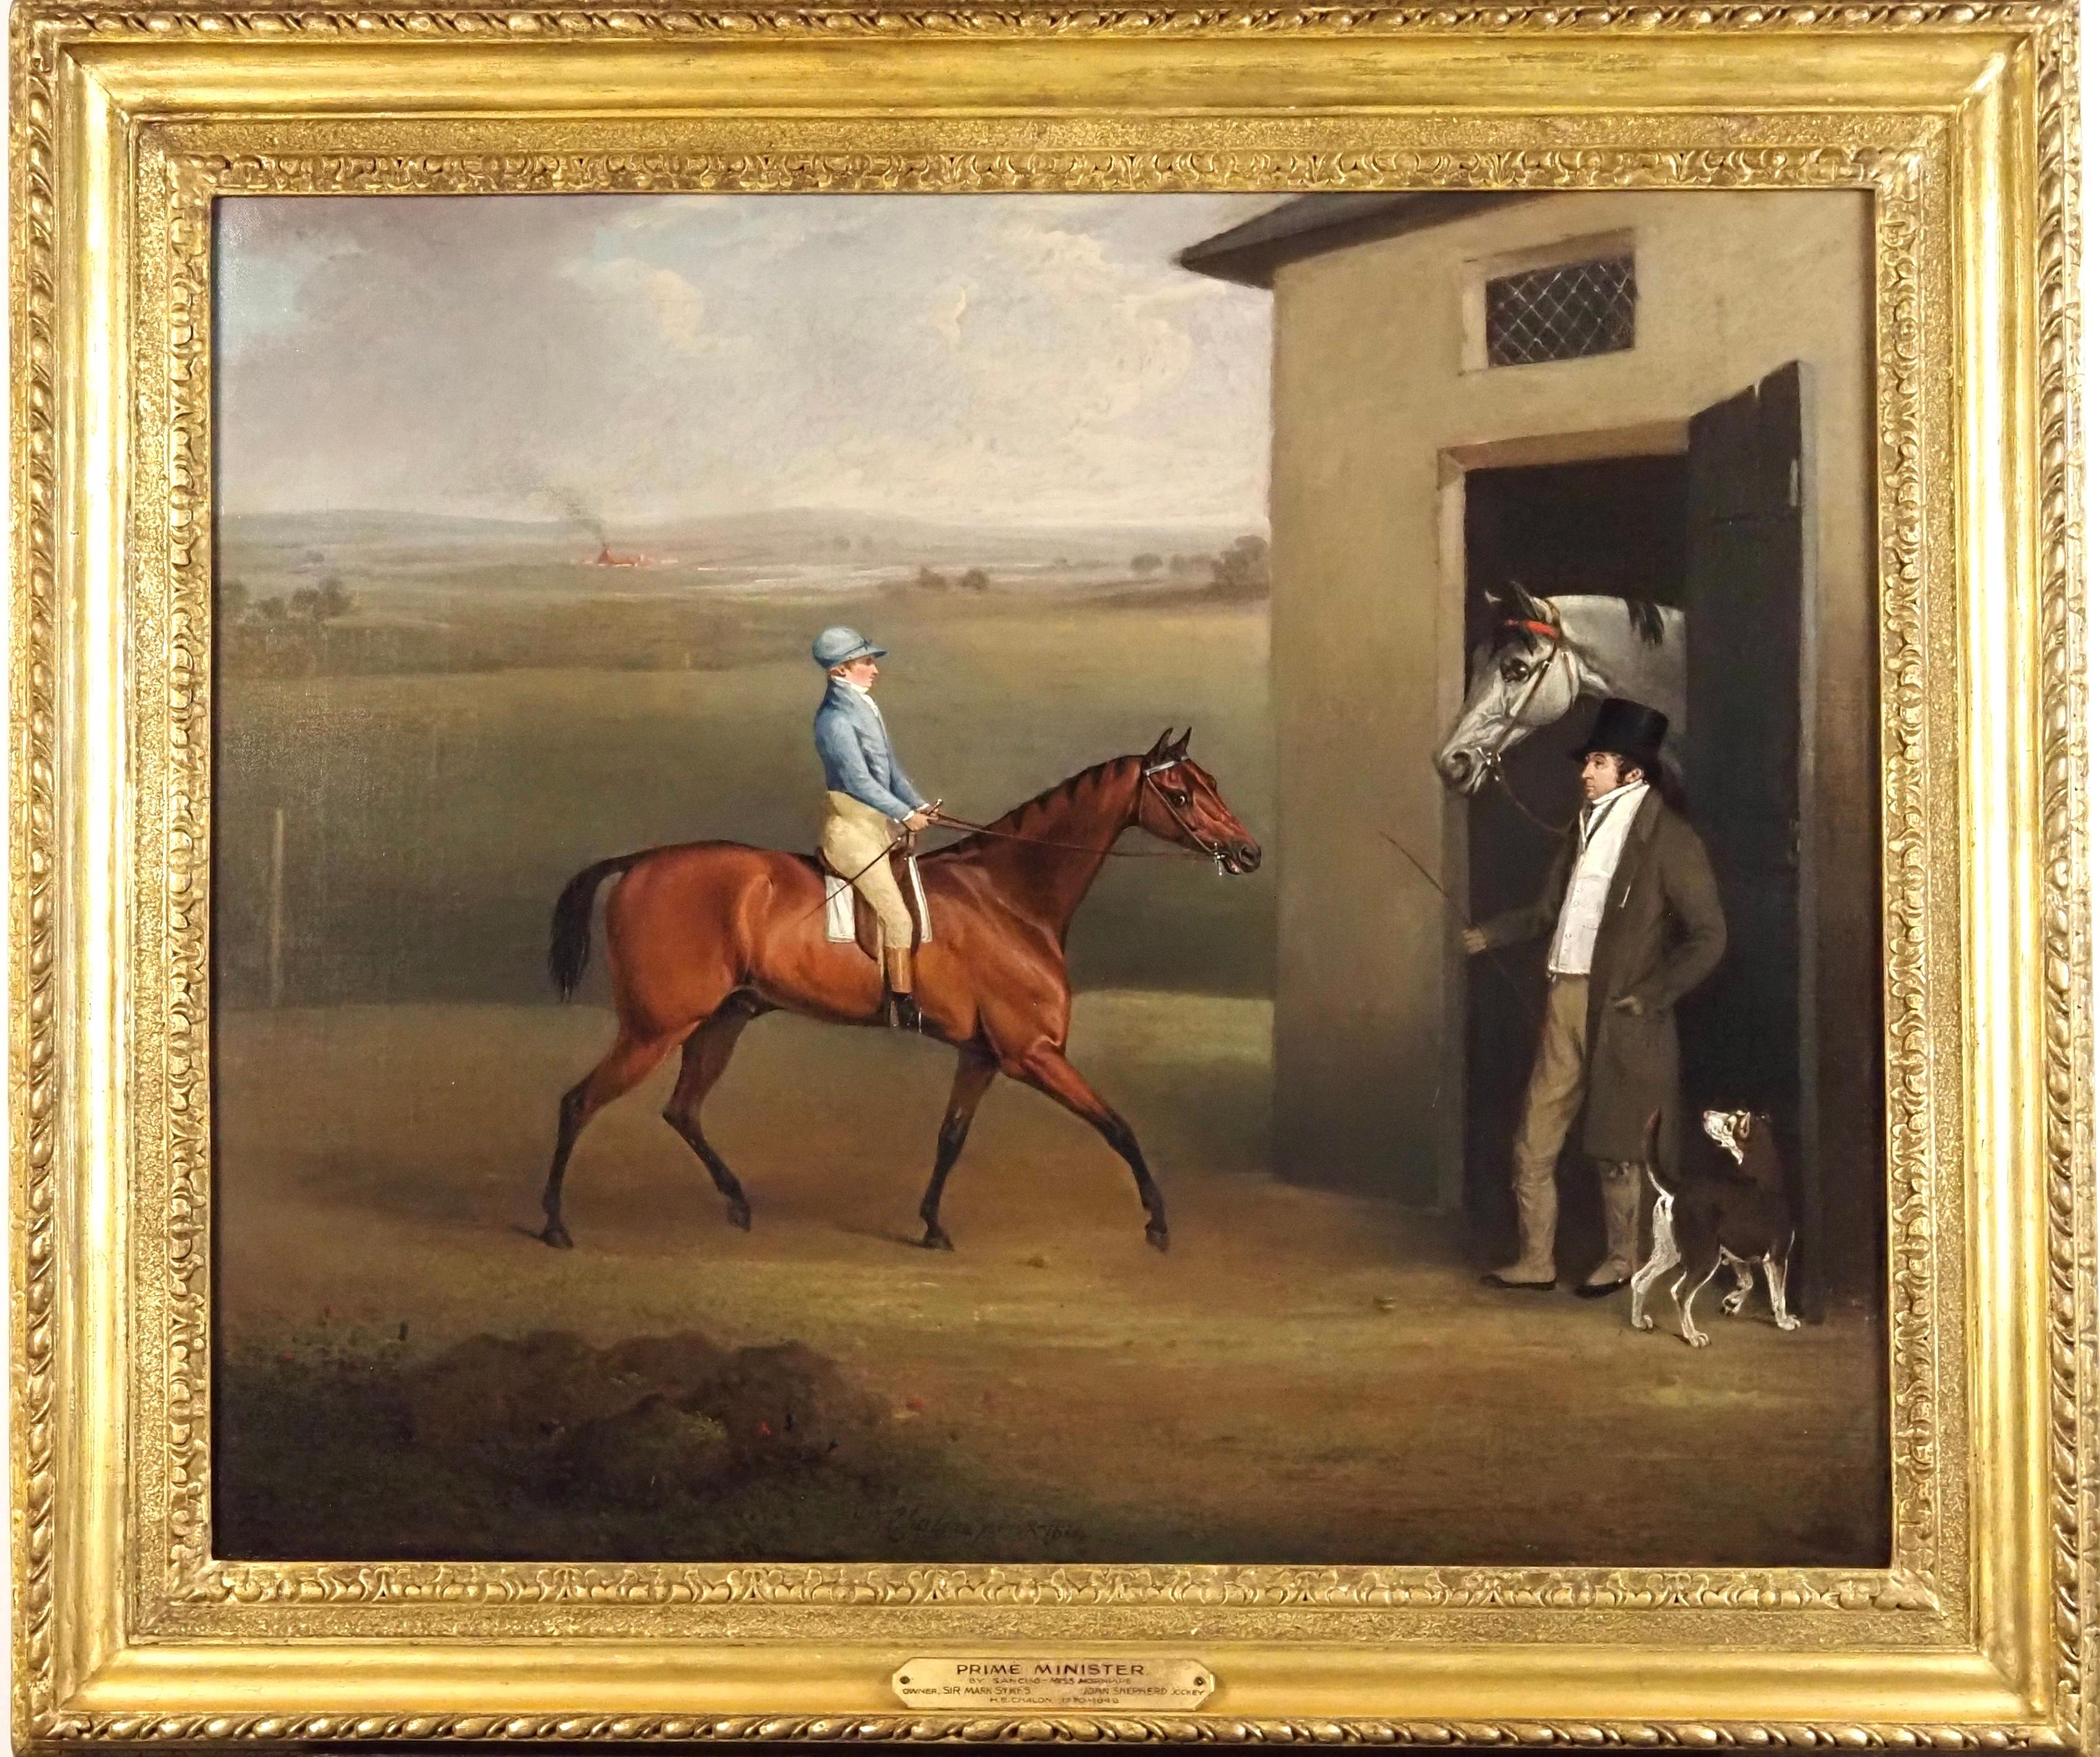 'Prime Minister' with jockey John Shepherd up, and owner Sir Mark Sykes - Painting by Henry Bernard Chalon